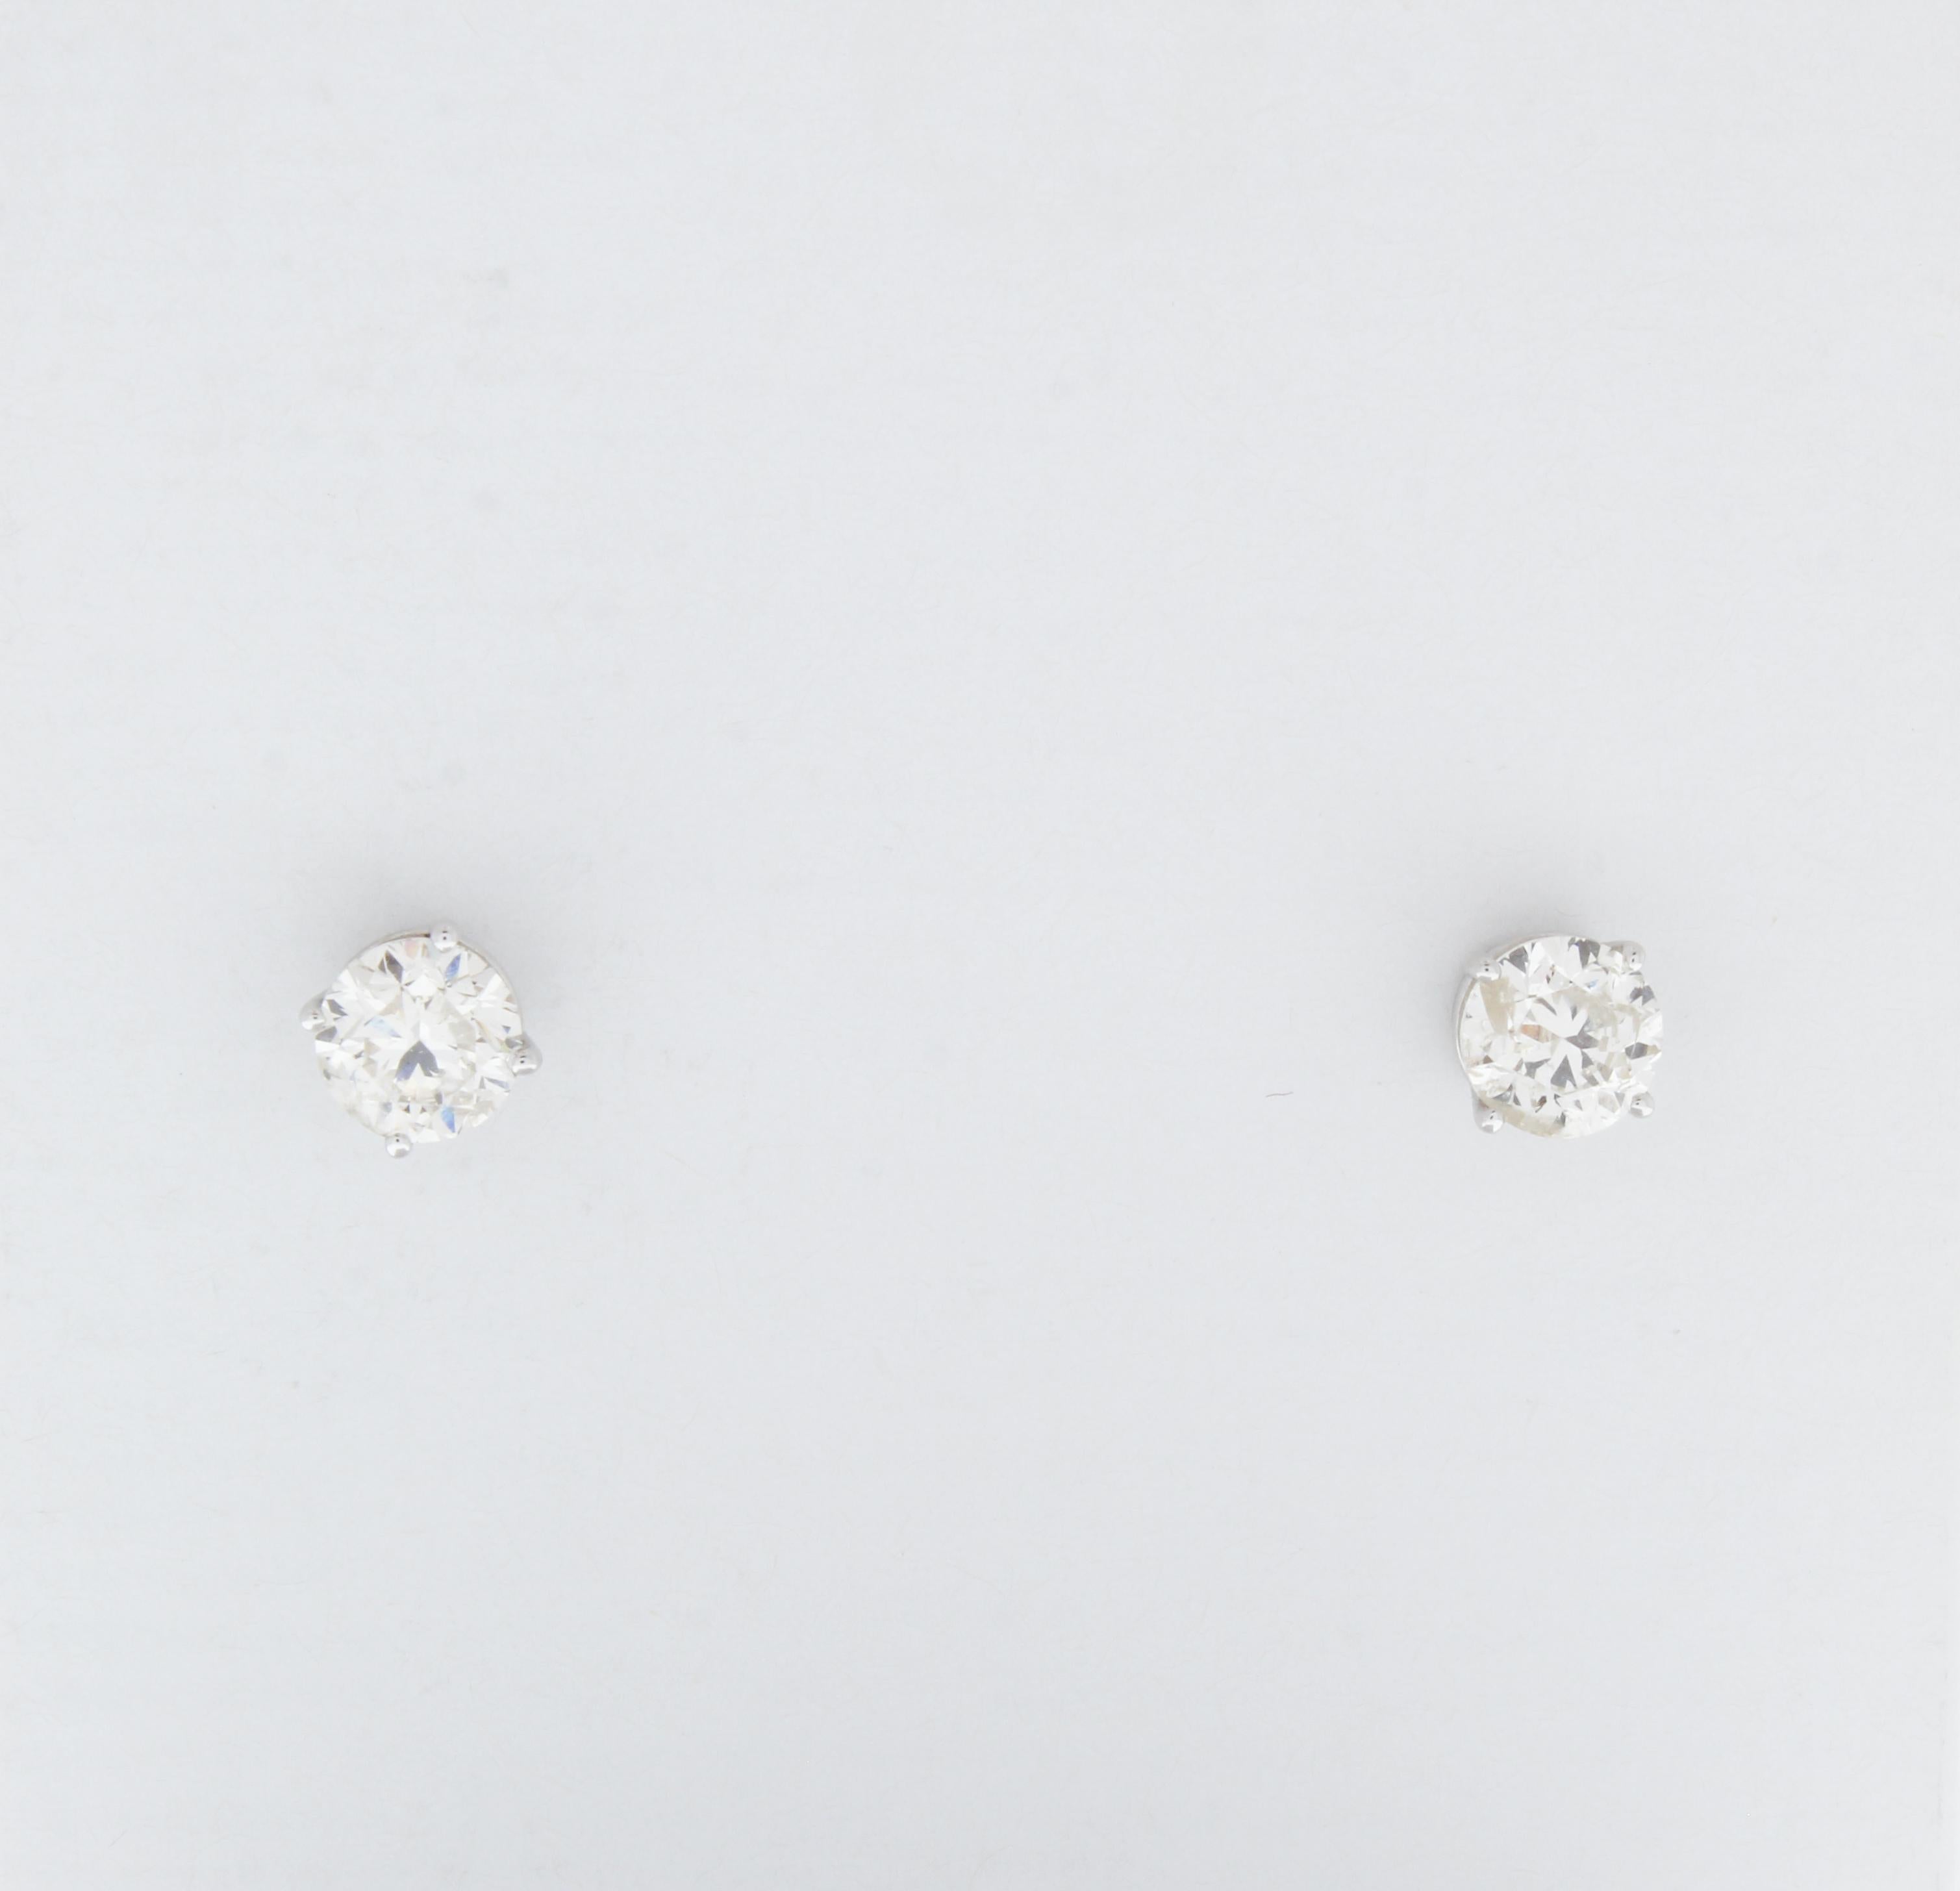 Contemporary 2.00 Carat Total Diamond Stud Earrings in 14k Yellow Gold			 For Sale